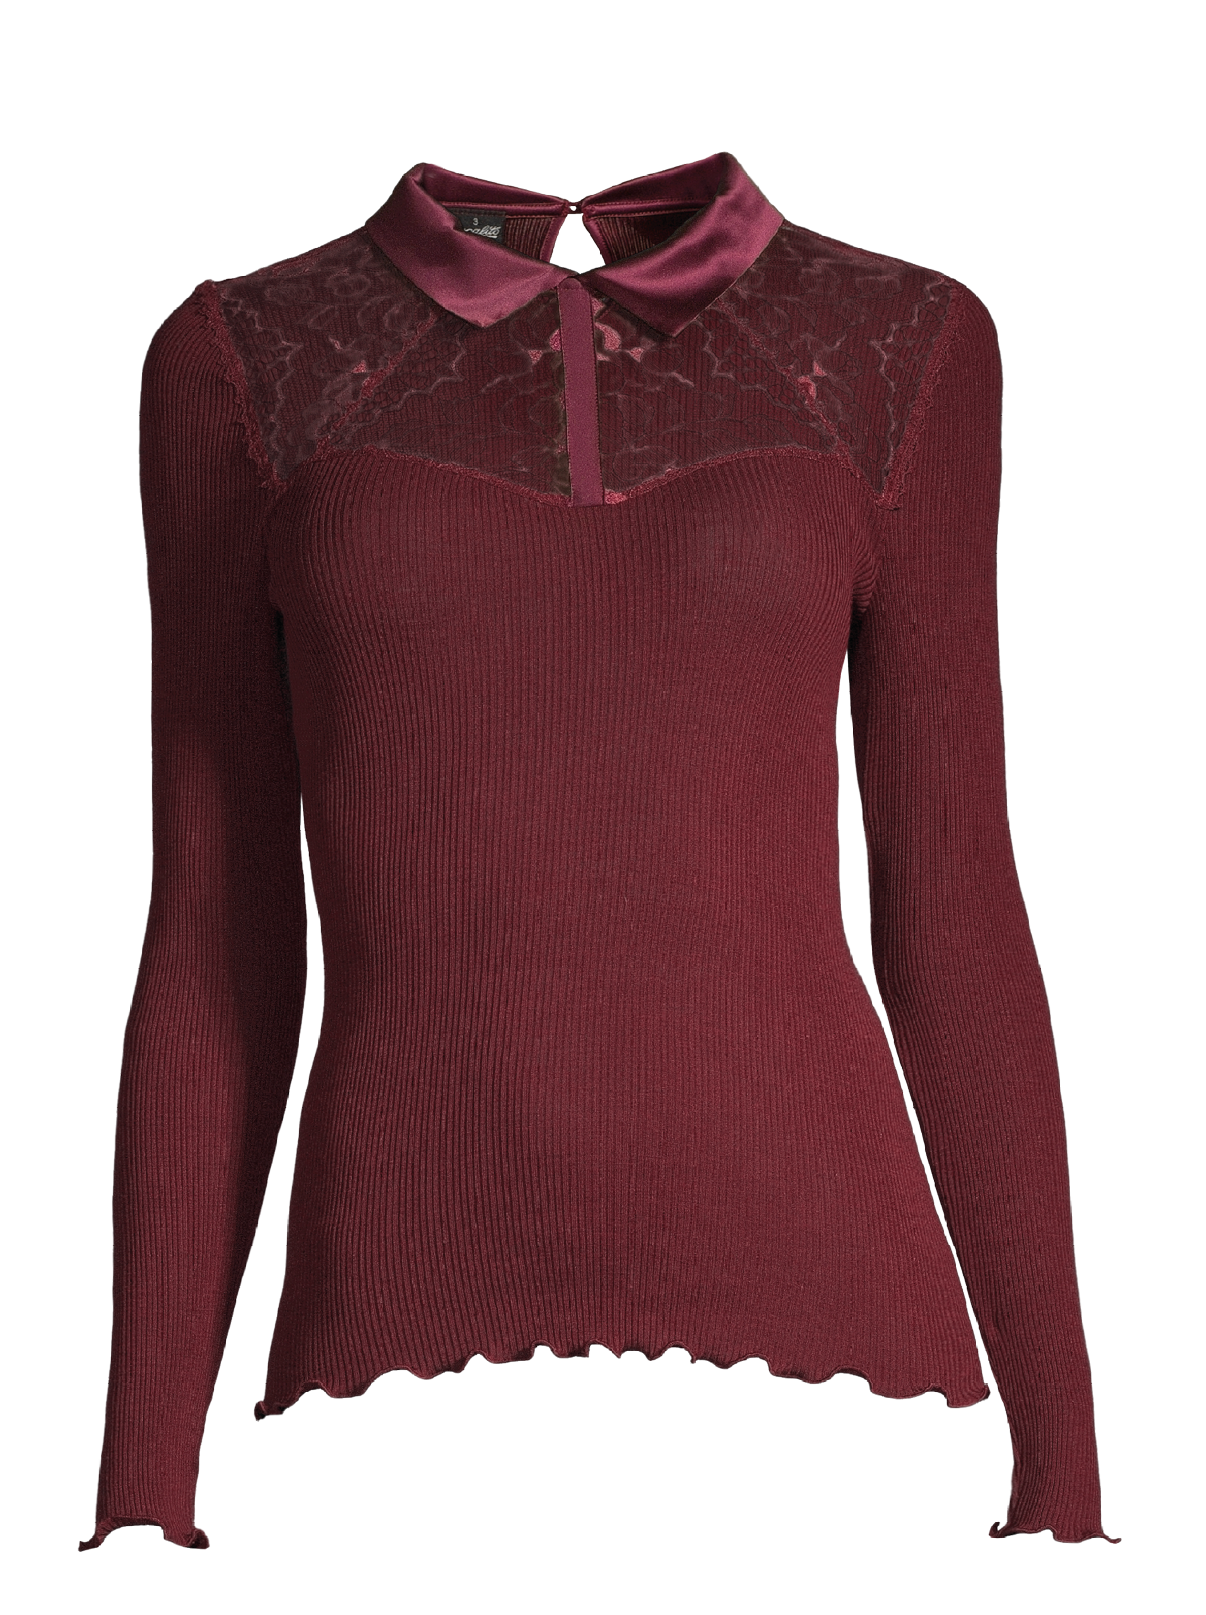 Long Sleeves Shirt with Leavers lace 6466 - Oscalito